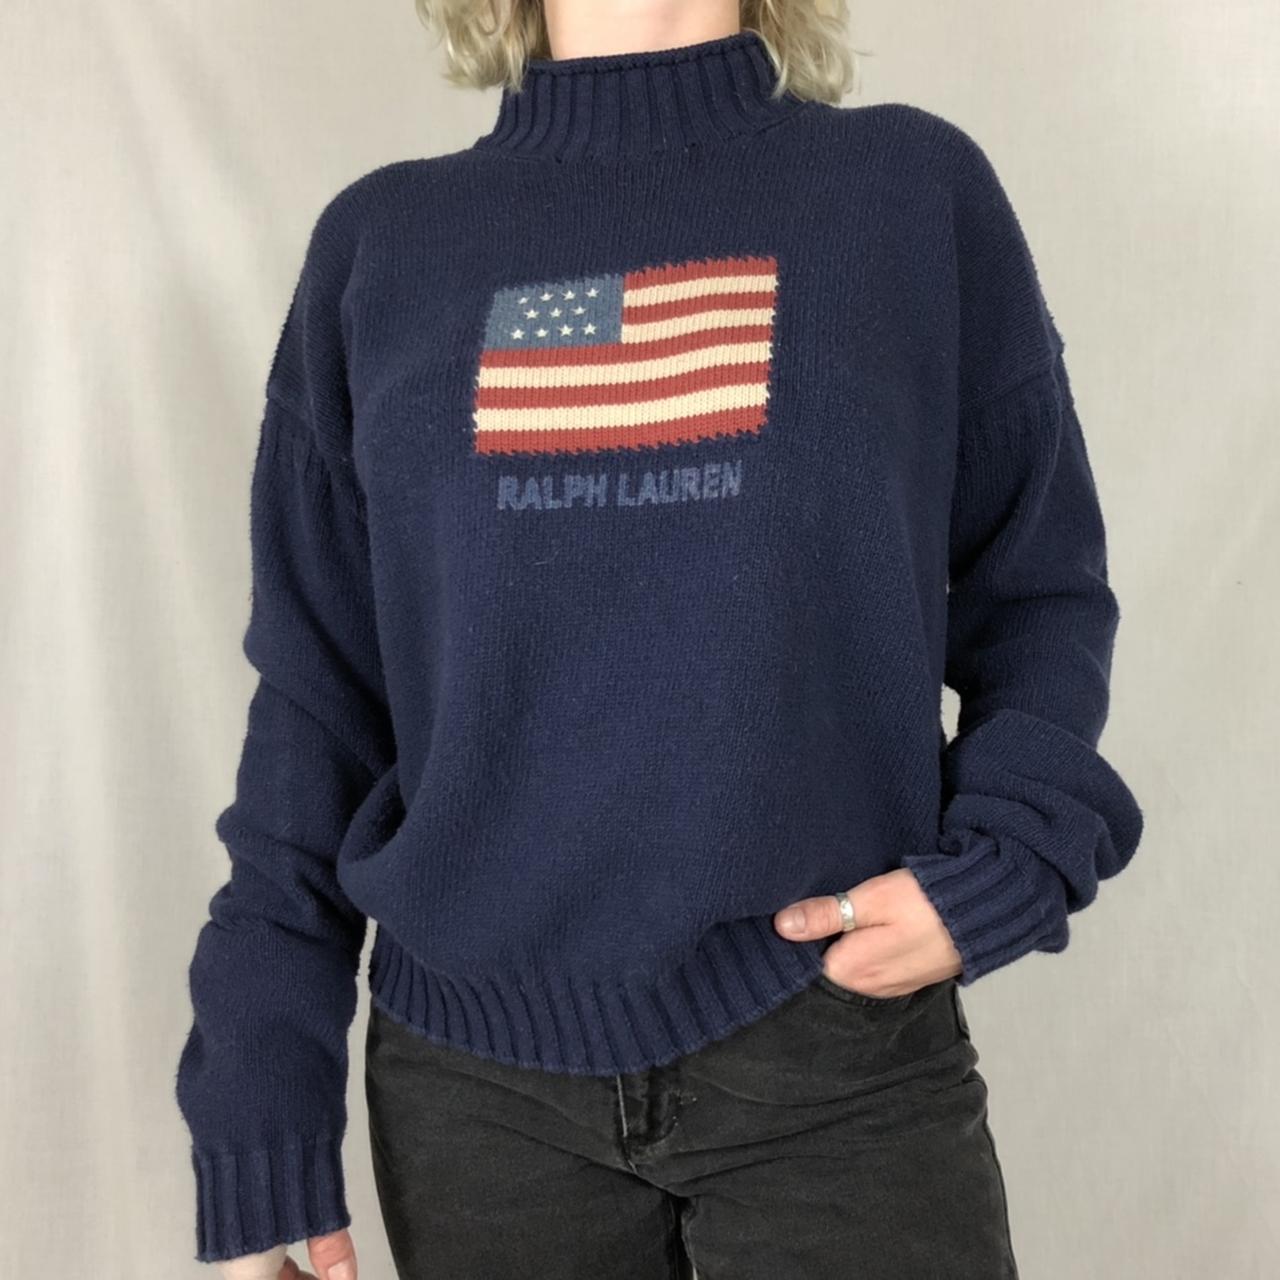 Vintage Ralph Lauren flag sweater. Tight knitted